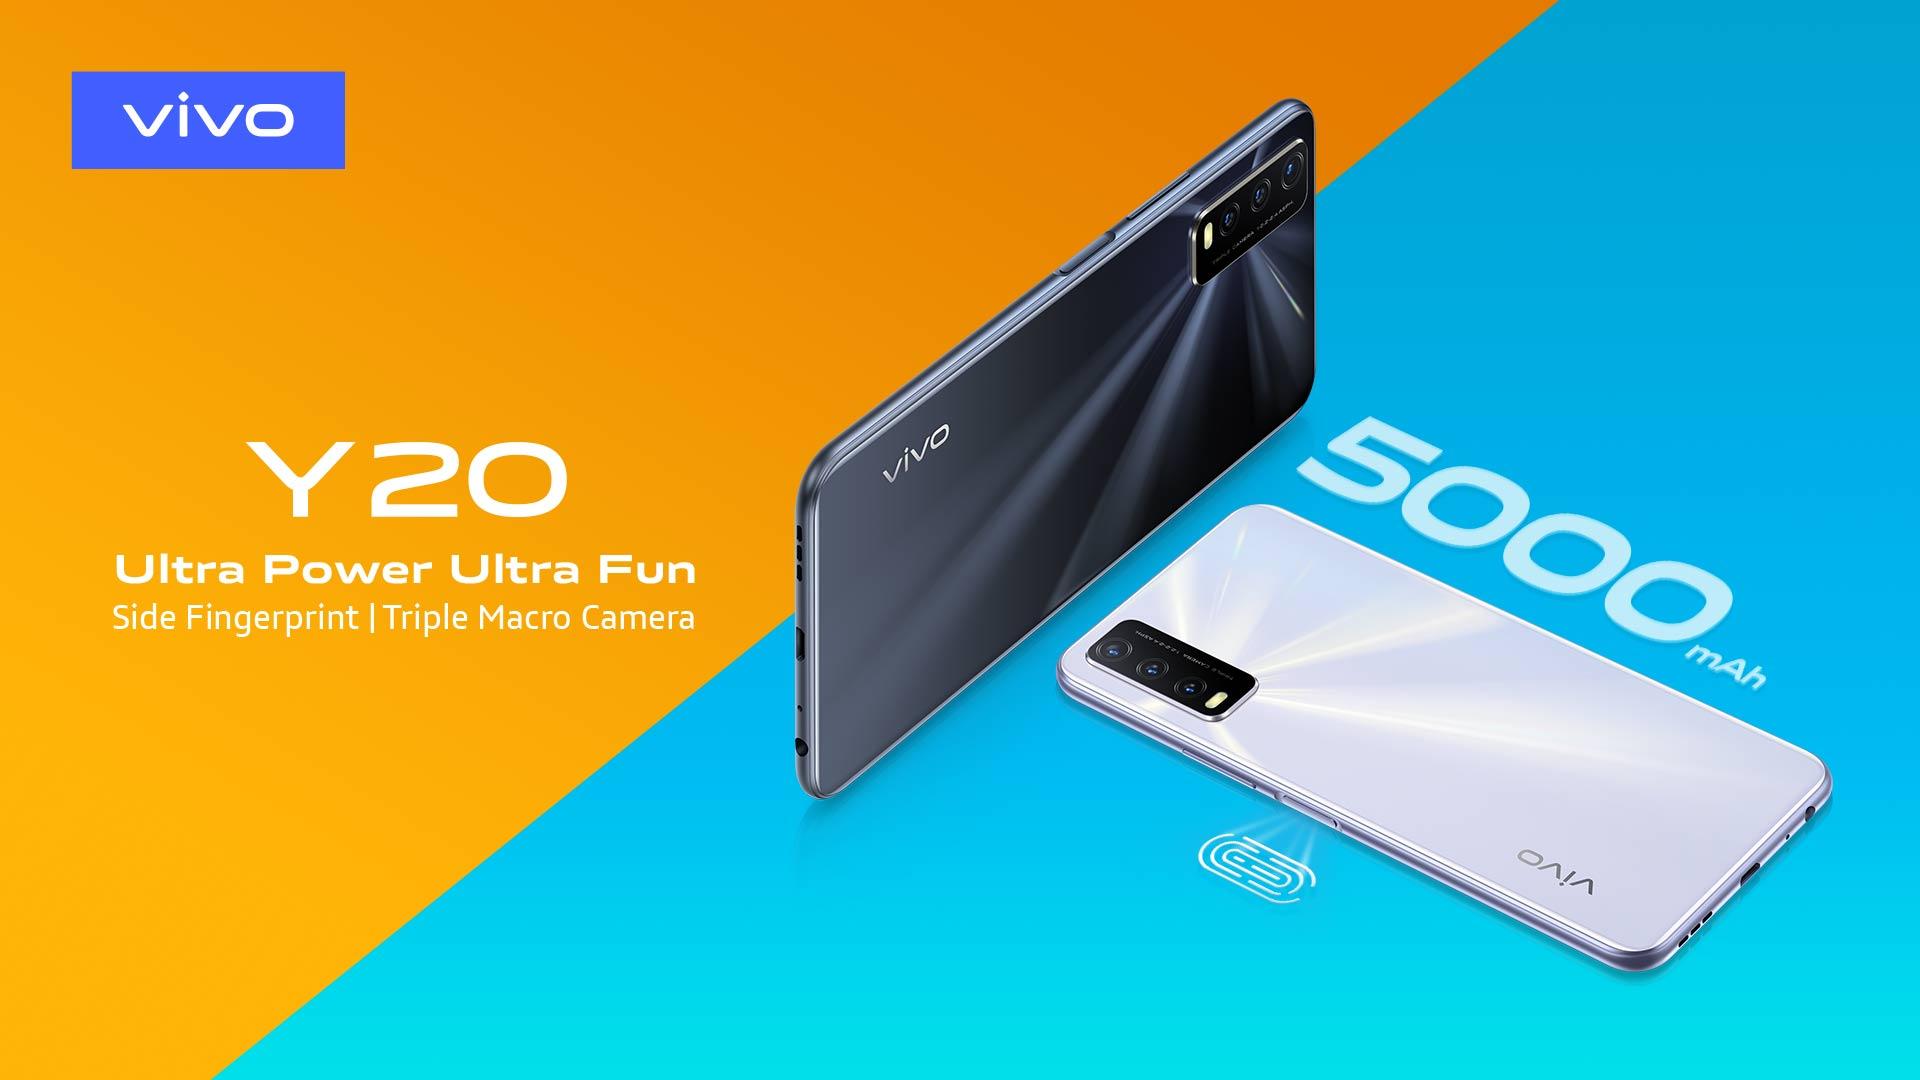 vivo Launches Y20 with 5000mAh Battery, Triple Macro Camera and Side Fingerprint